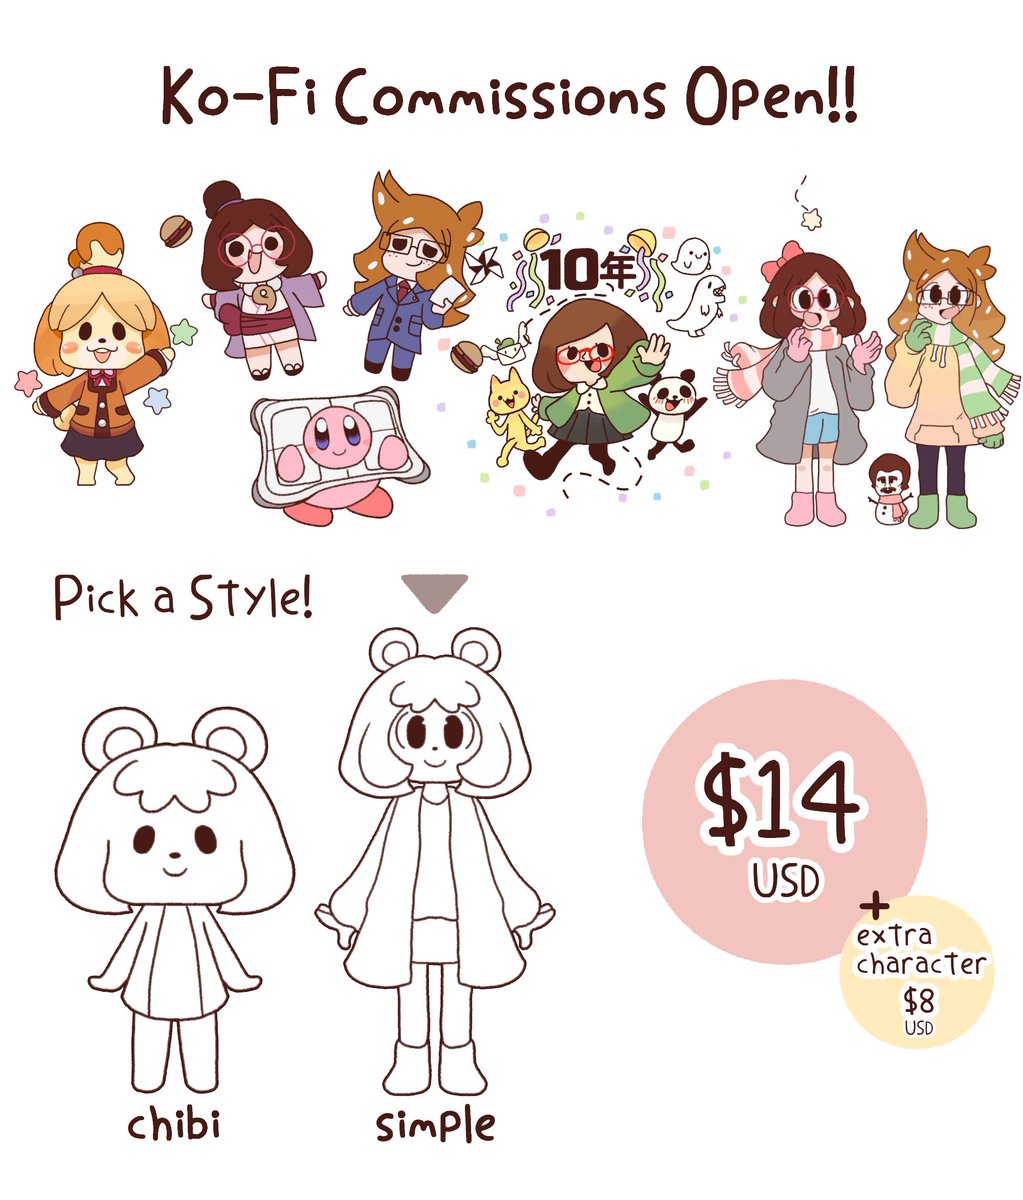 Hi!! Commissions are Open!! c:
Decided to make them through Ko-fi! ^^ its super simple and easy this way! c:
☀️https://t.co/rDUchzFD7g 